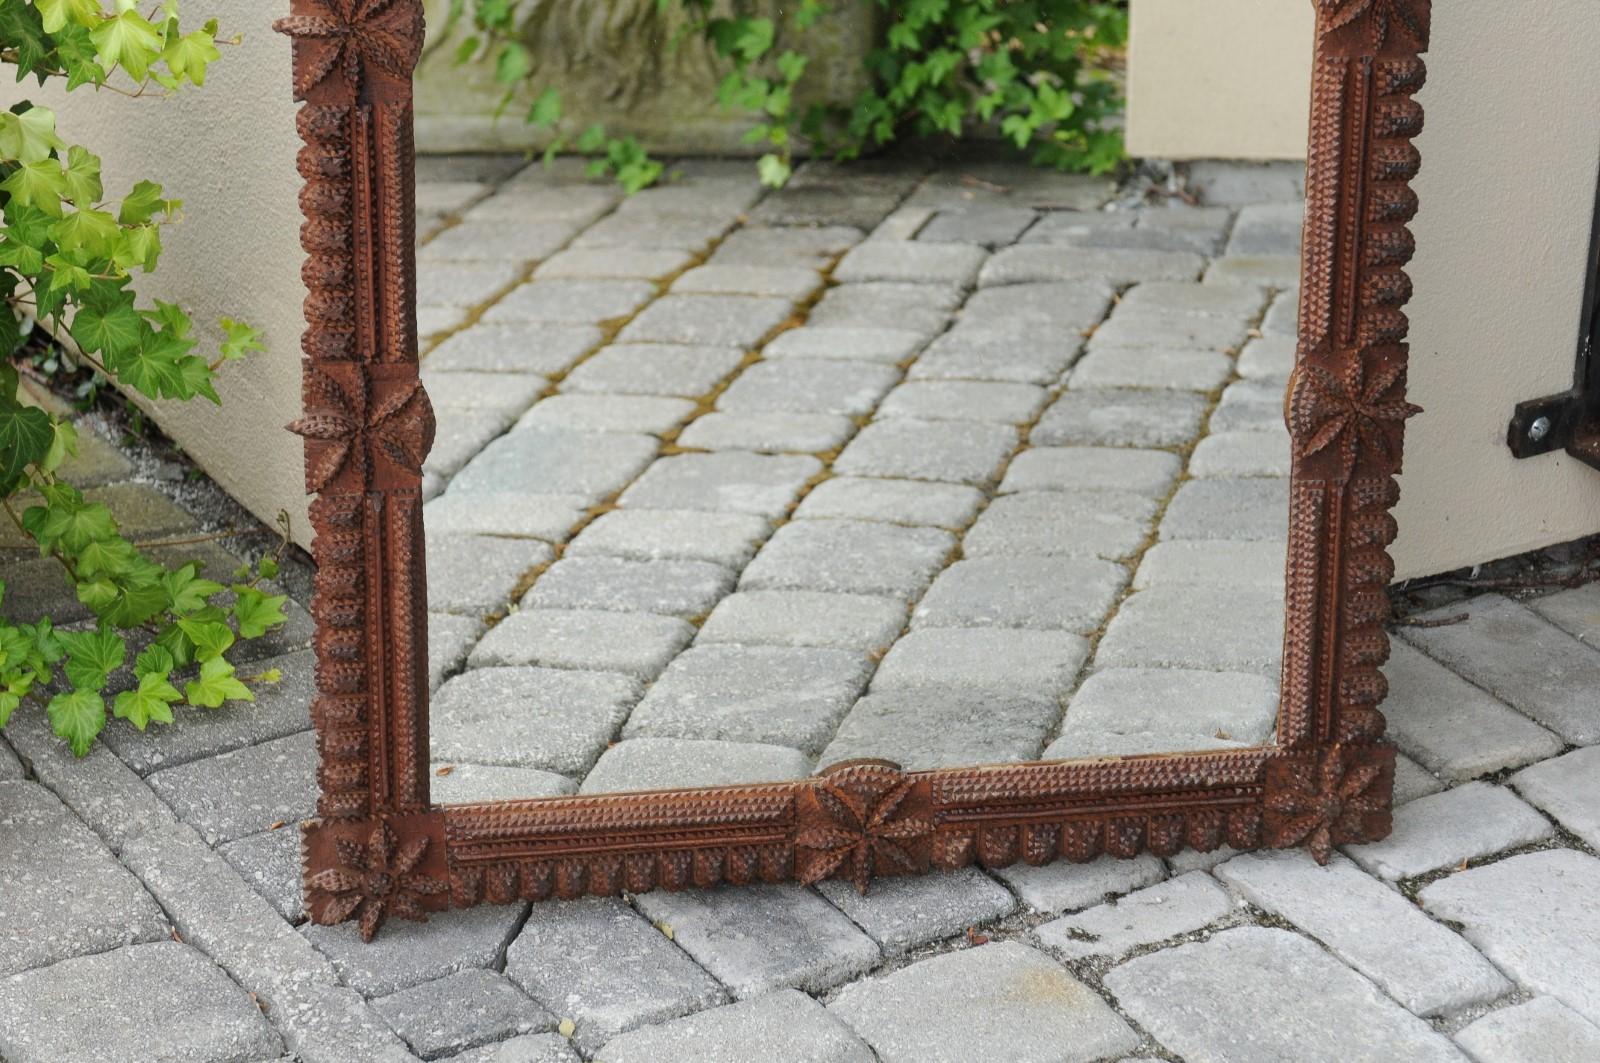 20th Century French 1900s Carved Tramp Art Mirror with Star Motifs and Protruding Corners